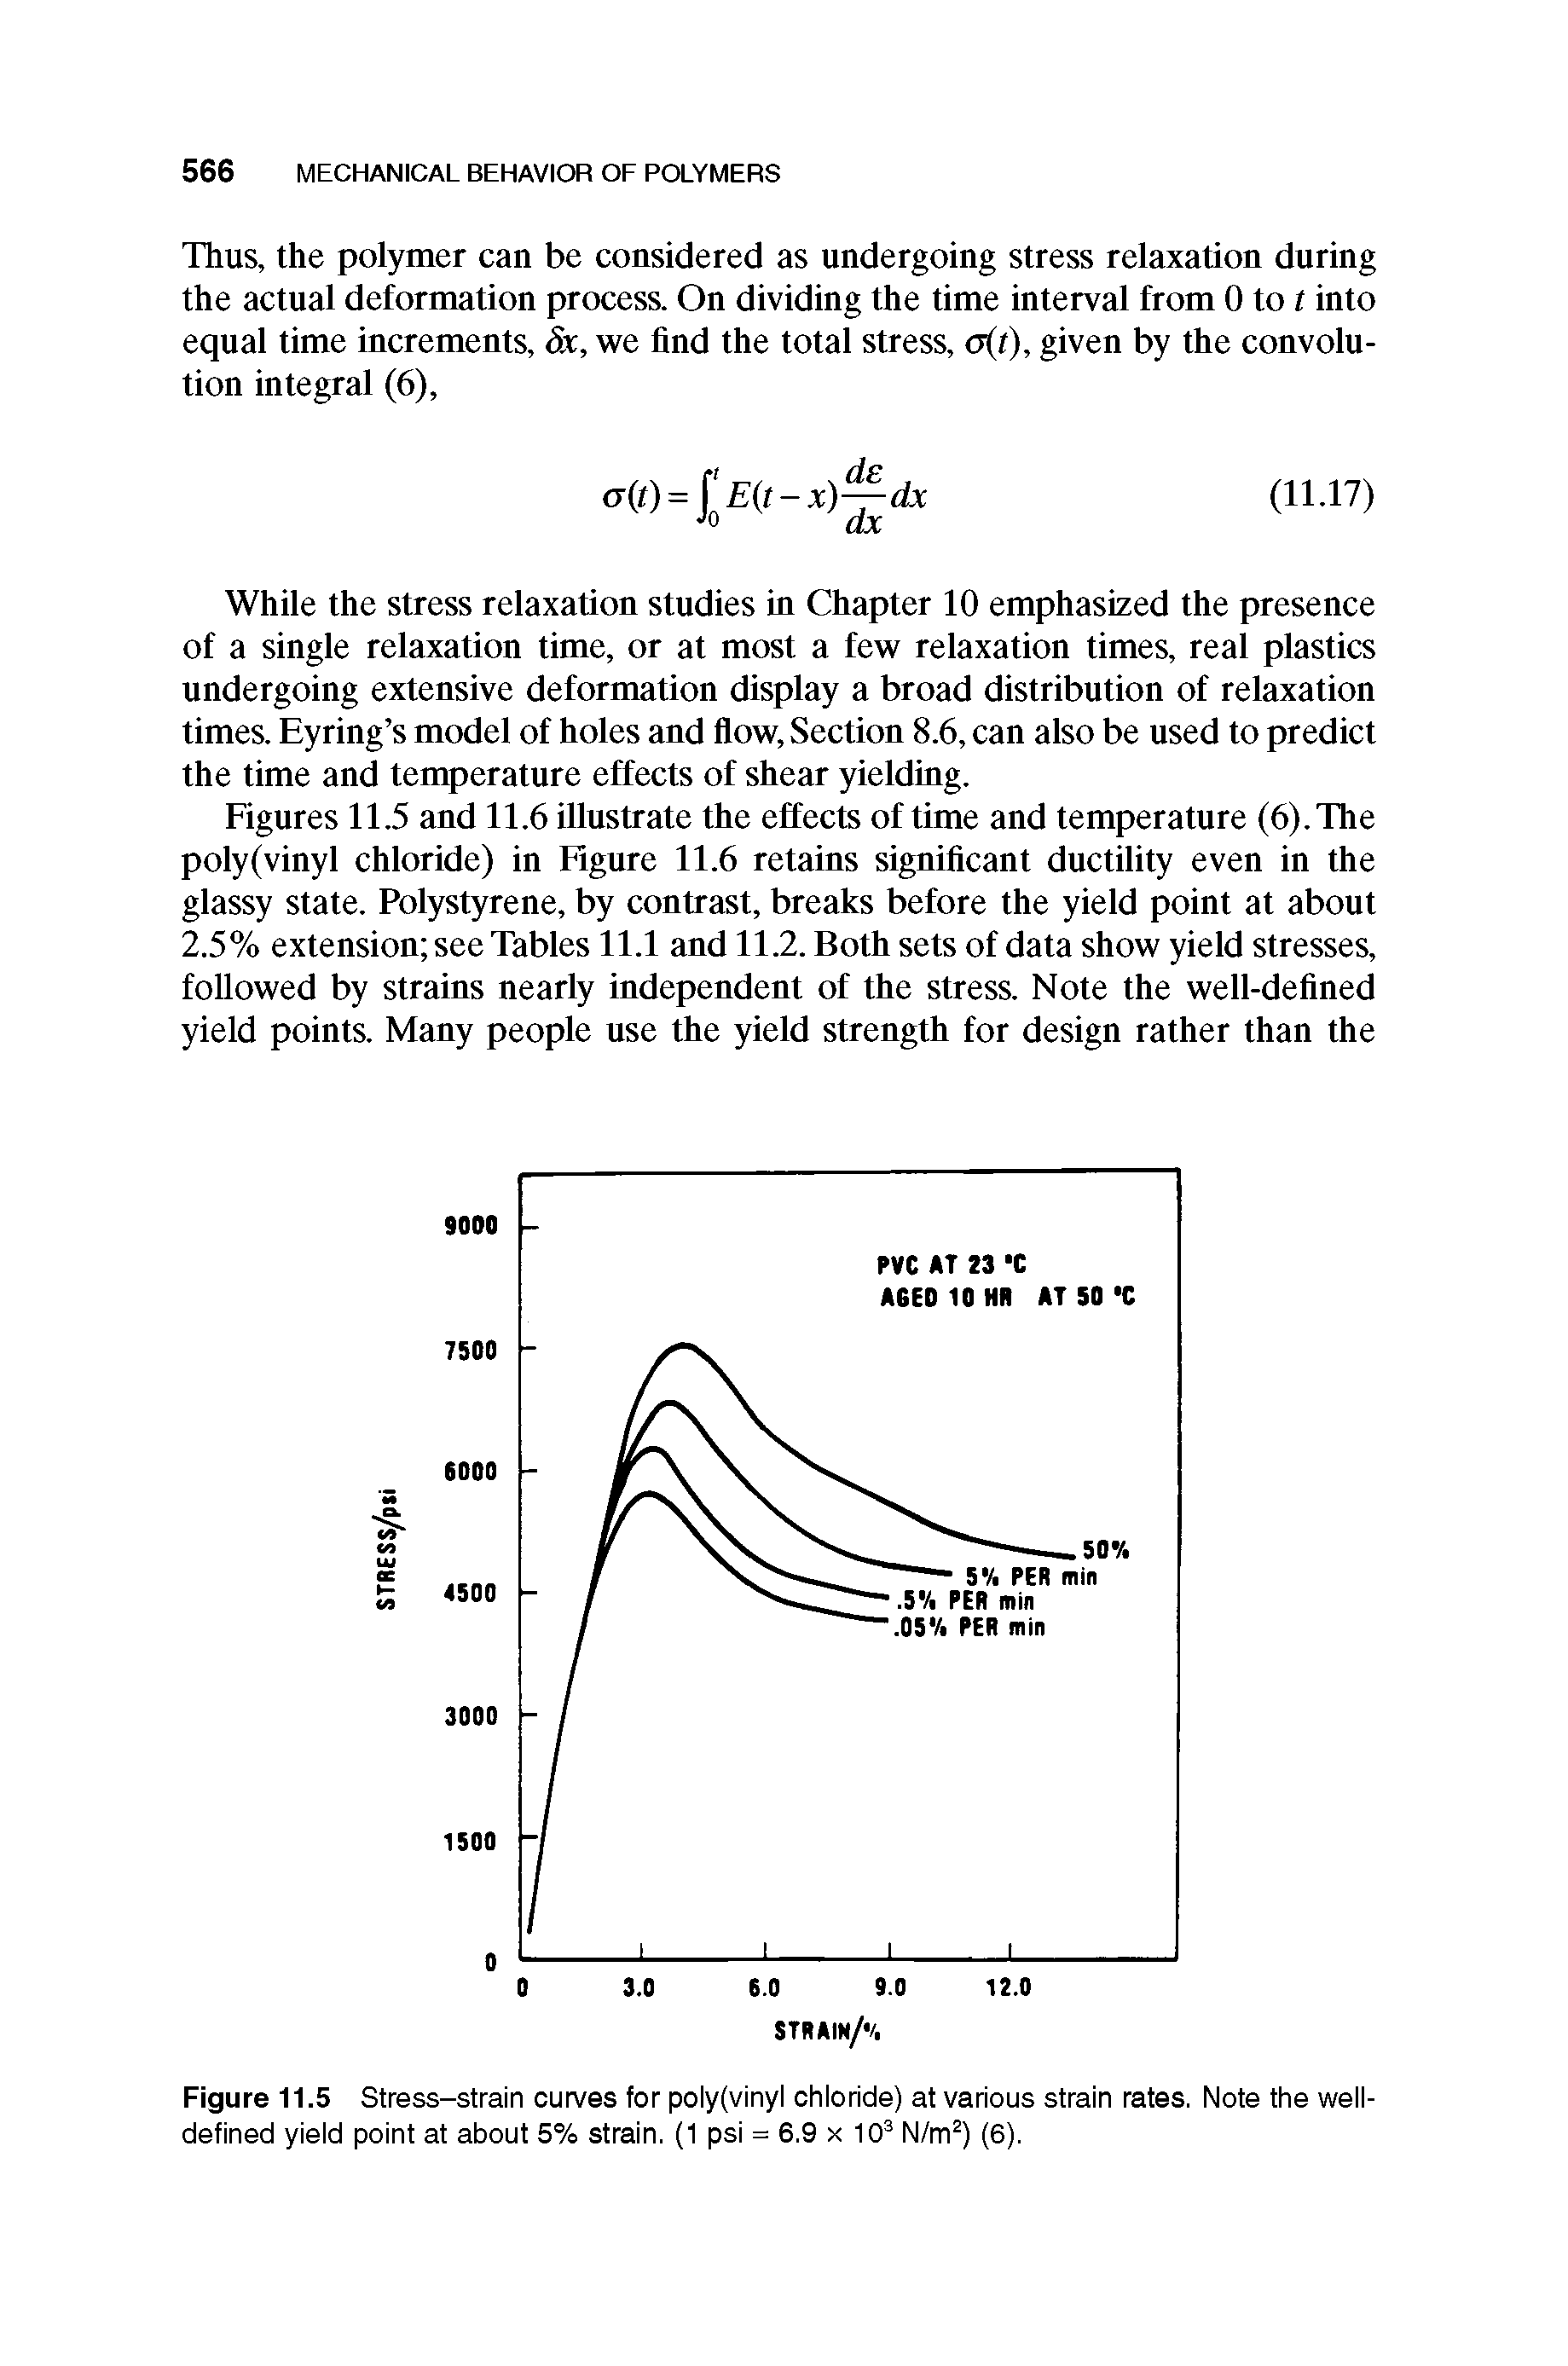 Figures 11.5 and 11.6 illustrate the effects of time and temperature (6). The poly(vinyl chloride) in Figure 11.6 retains significant ductility even in the glassy state. Polystyrene, by contrast, breaks before the yield point at about 2.5% extension see Tables 11.1 and 11.2. Both sets of data show yield stresses, followed by strains nearly independent of the stress. Note the well-defined yield points. Many people use the yield strength for design rather than the...